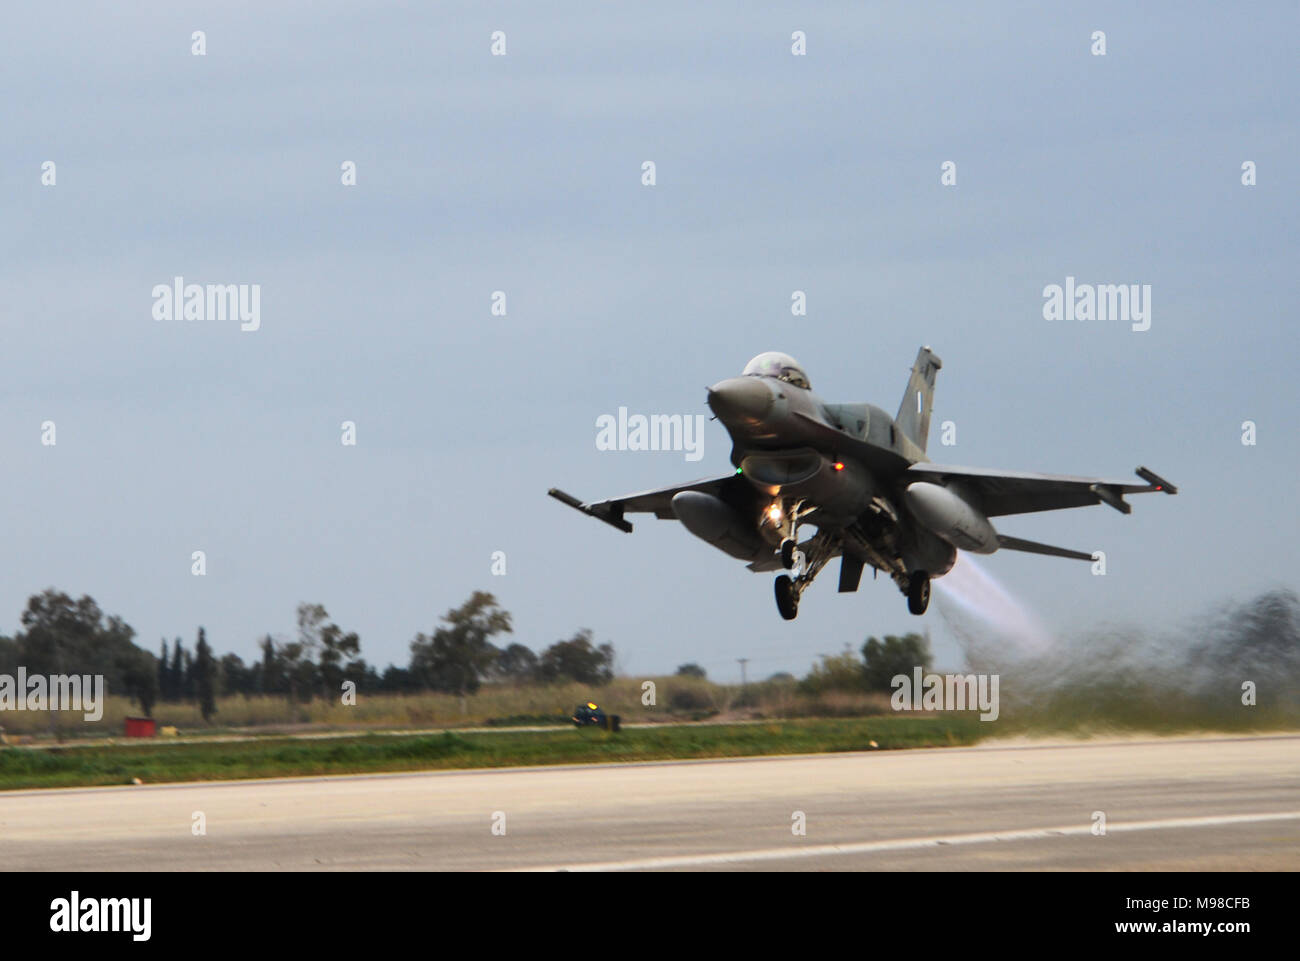 An F-16 Fighting Falcon assigned to the Hellenic Air Forces’ 336th Squadron takes off from Andravida Air Base, Greece, March 21, 2018, during exercise INIOHOS 18. The 336th Squadron are training with the 492nd Fighter Squadron, Royal Air Force Lakenheath, England and other partners and Allies during the exercise to increase interoperability and strengthen partnerships. (U.S. Air Force photo/1st Lt. Elias Small) Stock Photo